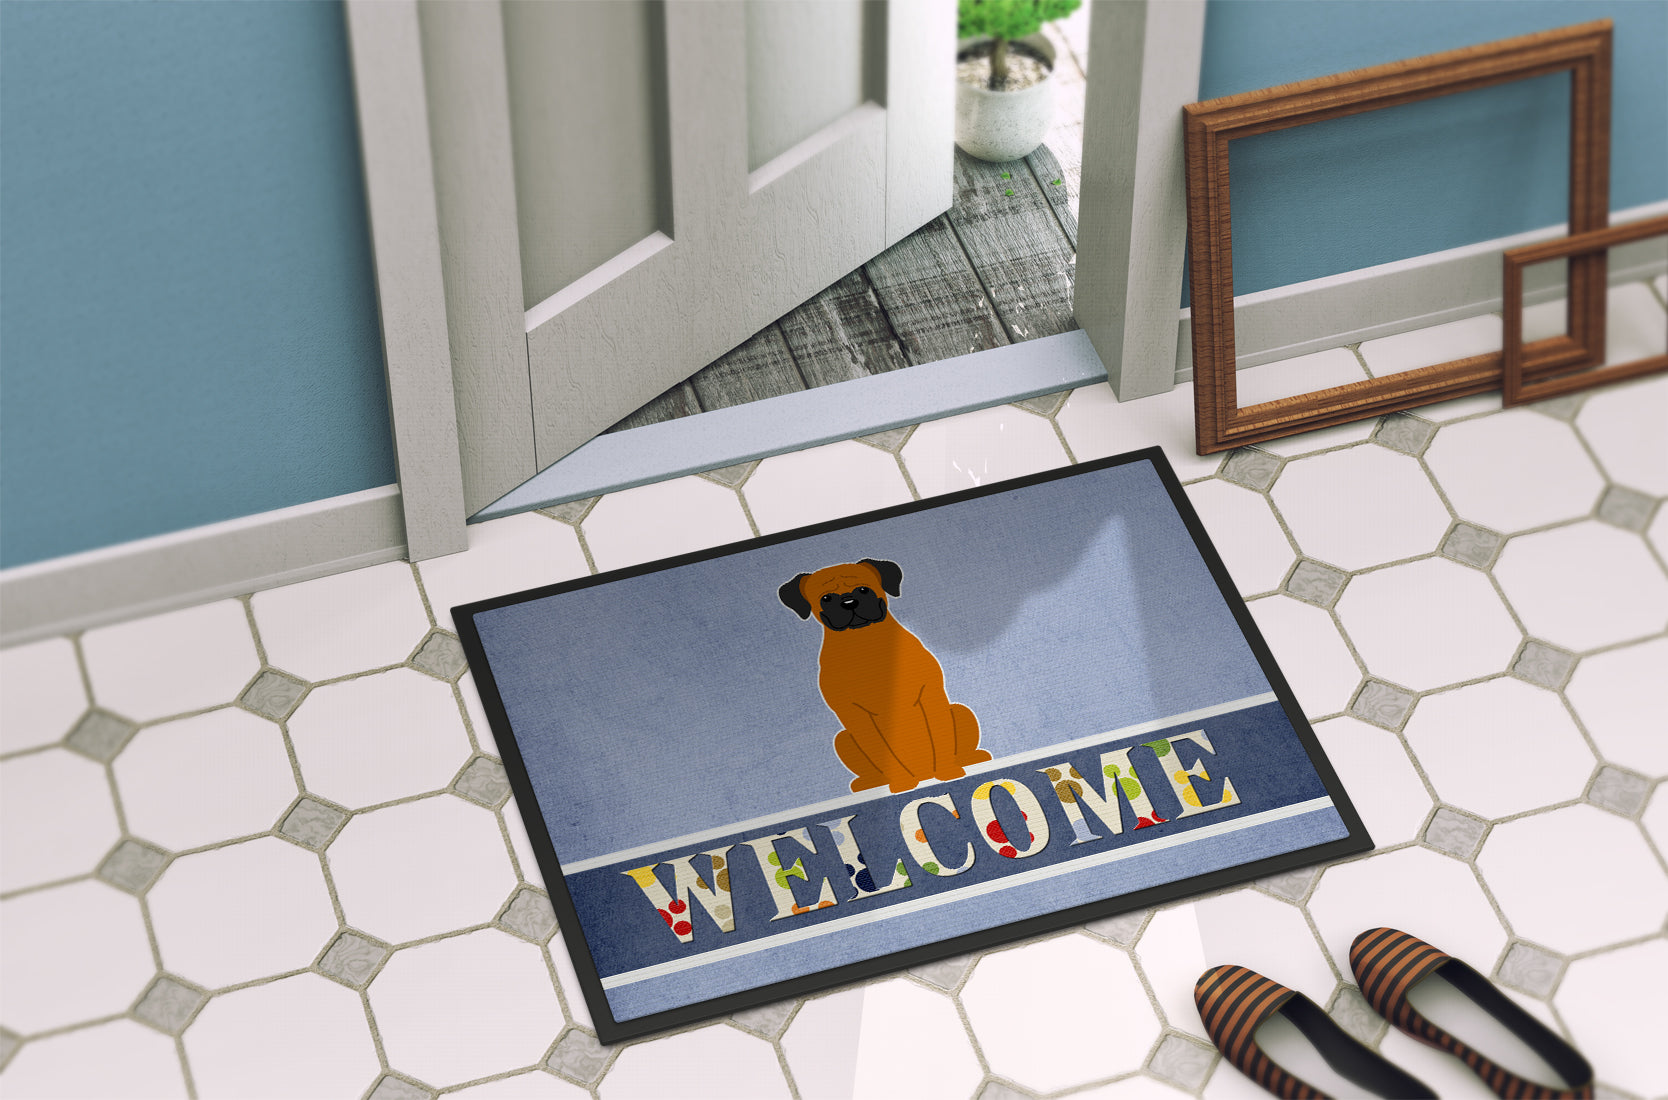 Fawn Boxer Welcome Indoor or Outdoor Mat 18x27 BB5696MAT - the-store.com